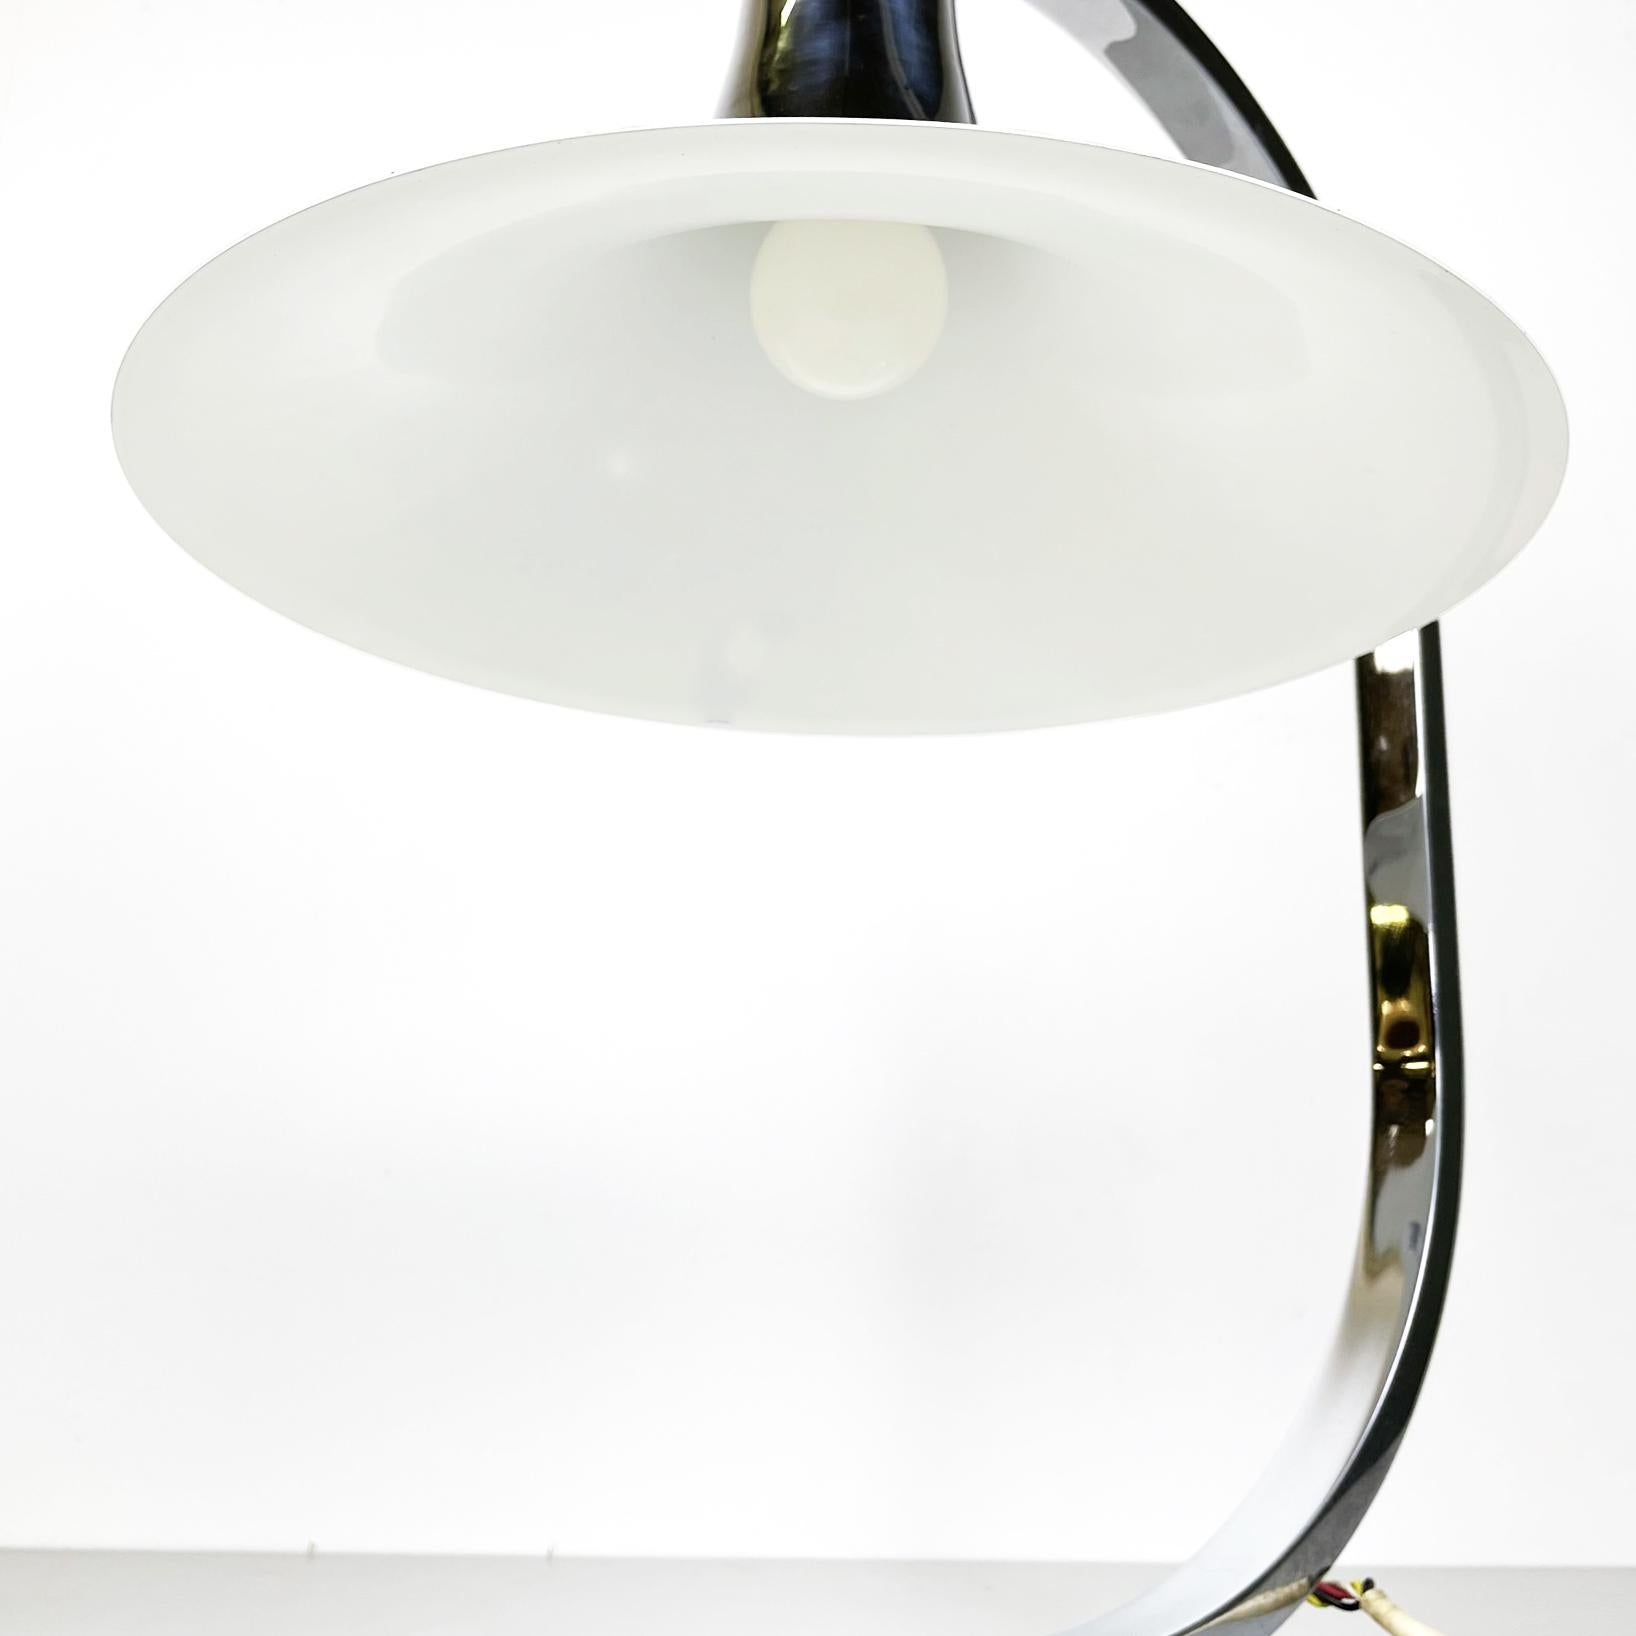 Italian Space Age Steel Table lamp AM/AS by Albini and Helg for Sirrah, 1970s 7